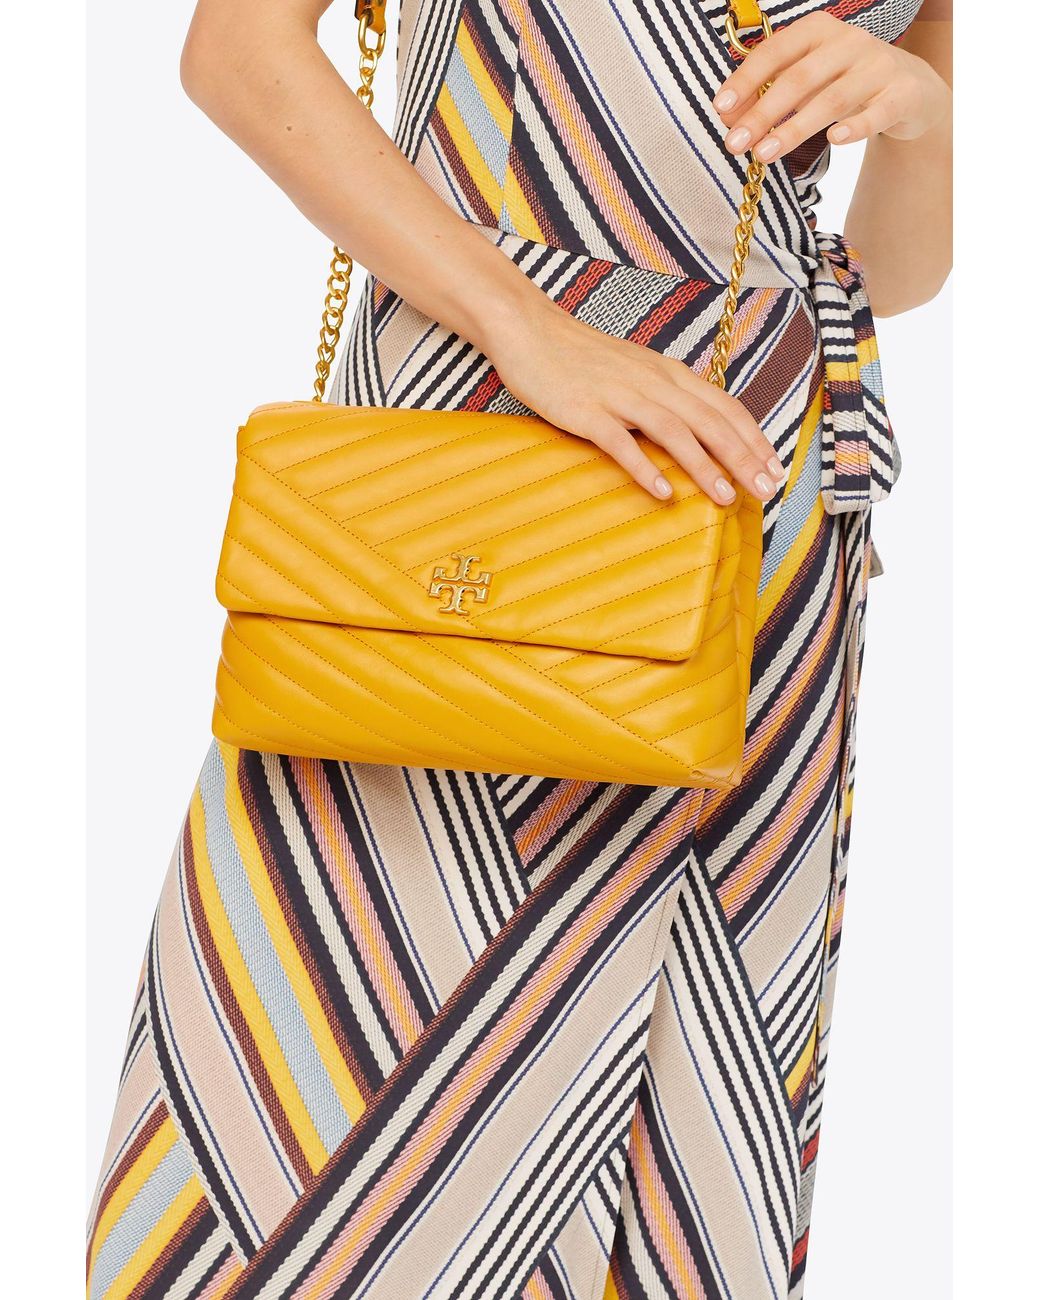 Tory Burch Kira Chevron Small Flap Shoulder Bag in Sycamore /Rolled Gold  $458